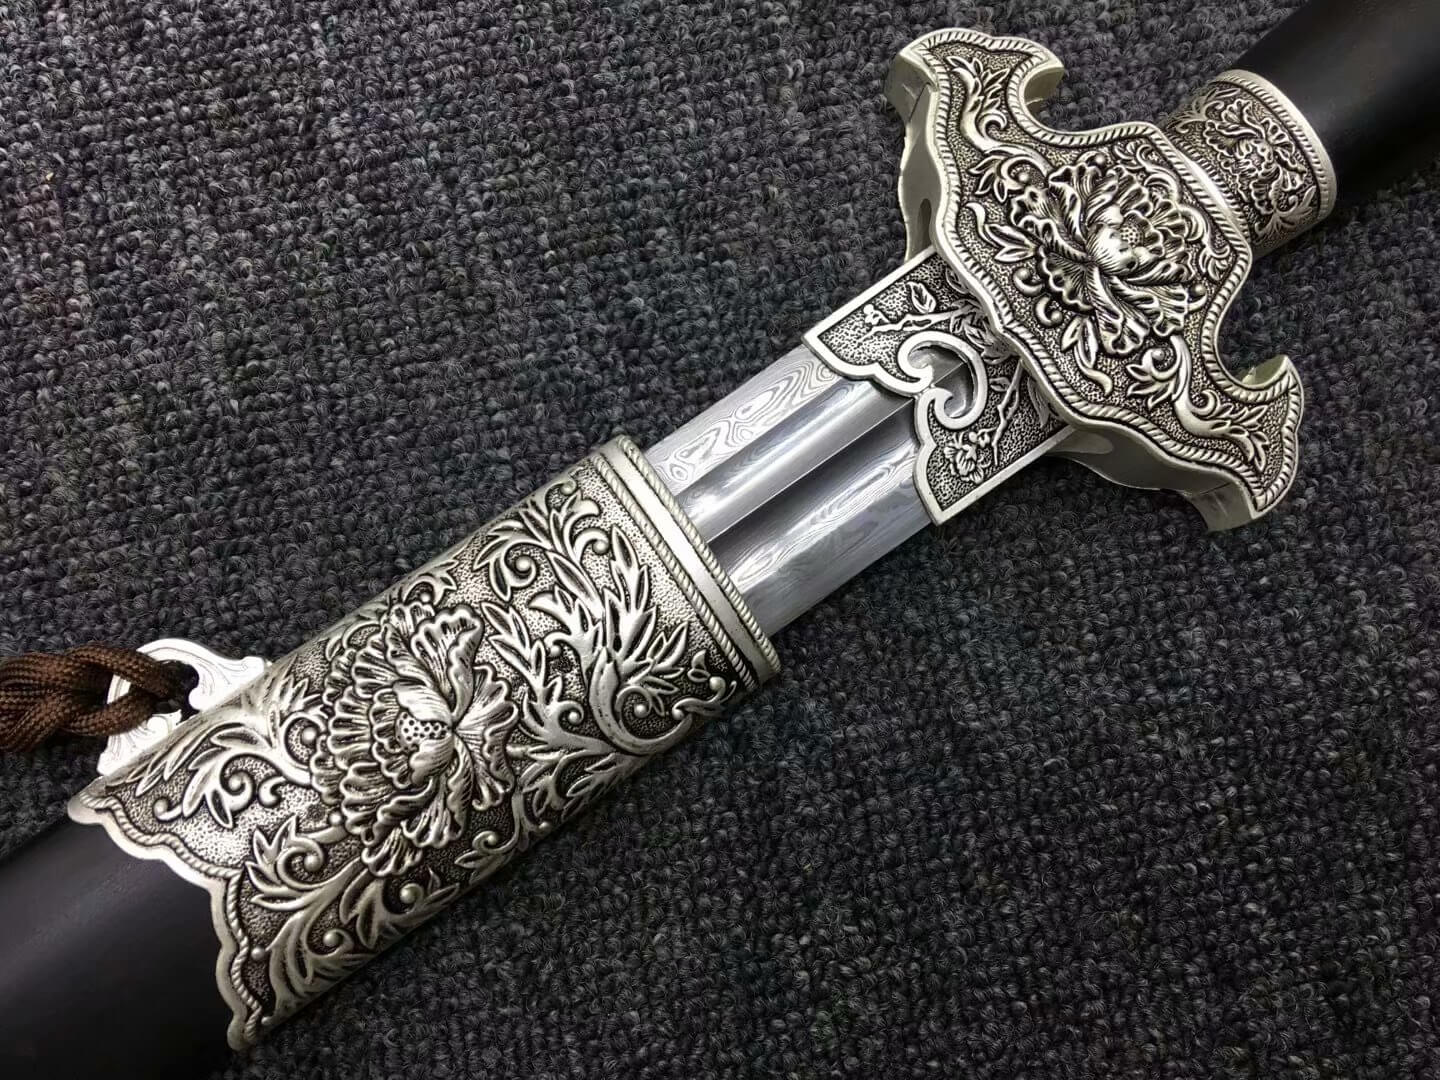 Peony sword(Damascus steel blade,Black wood,Alloy)Hand Forged - Chinese sword shop